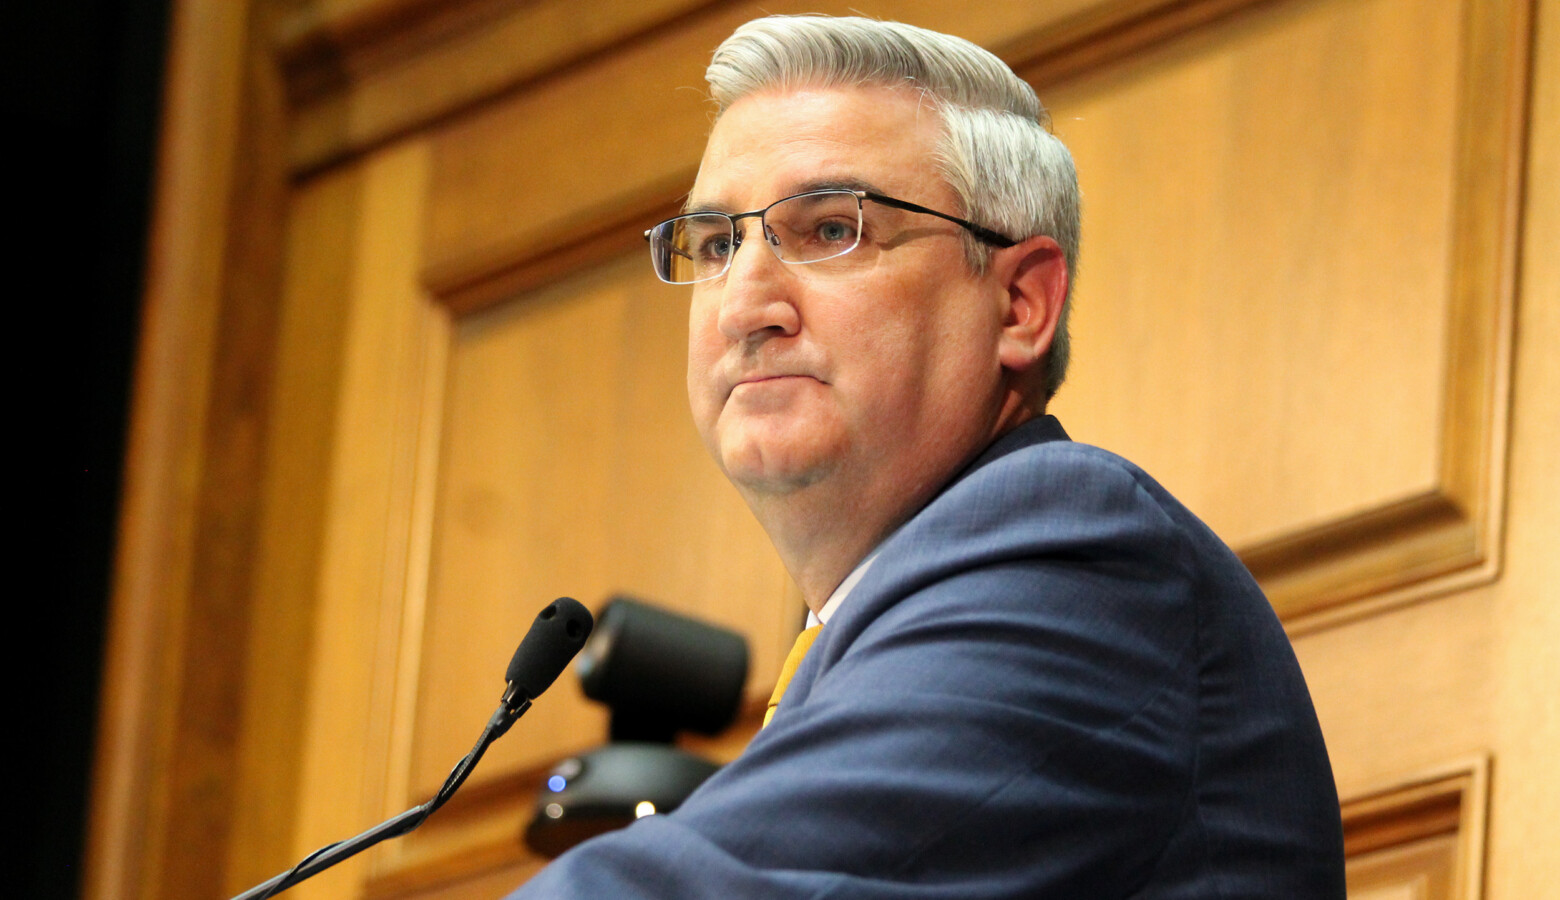 In a statement, Gov. Eric Holcomb calls the incident a “lesson learned” that even a quick photo requires following experts’ guidance to wear a mask in public. (Lauren Chapman/IPB News)